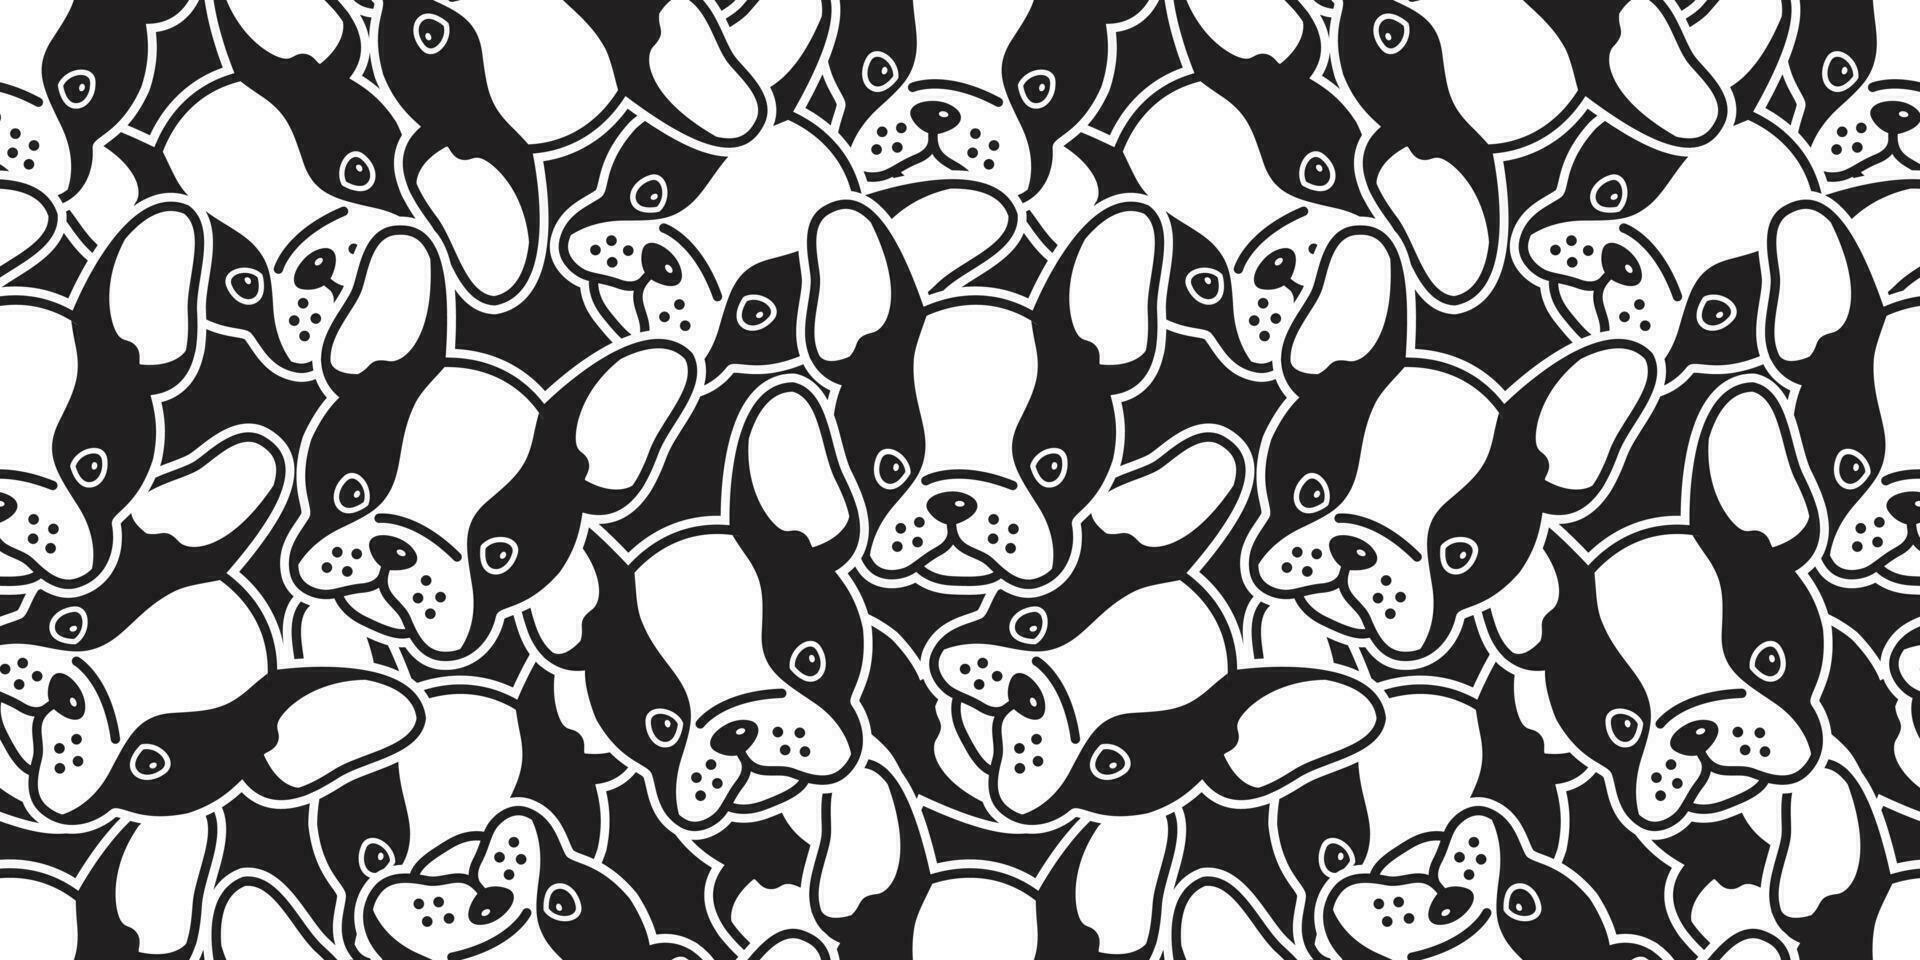 Dog seamless pattern french bulldog vector pug head cartoon isolated background wallpaper repeat